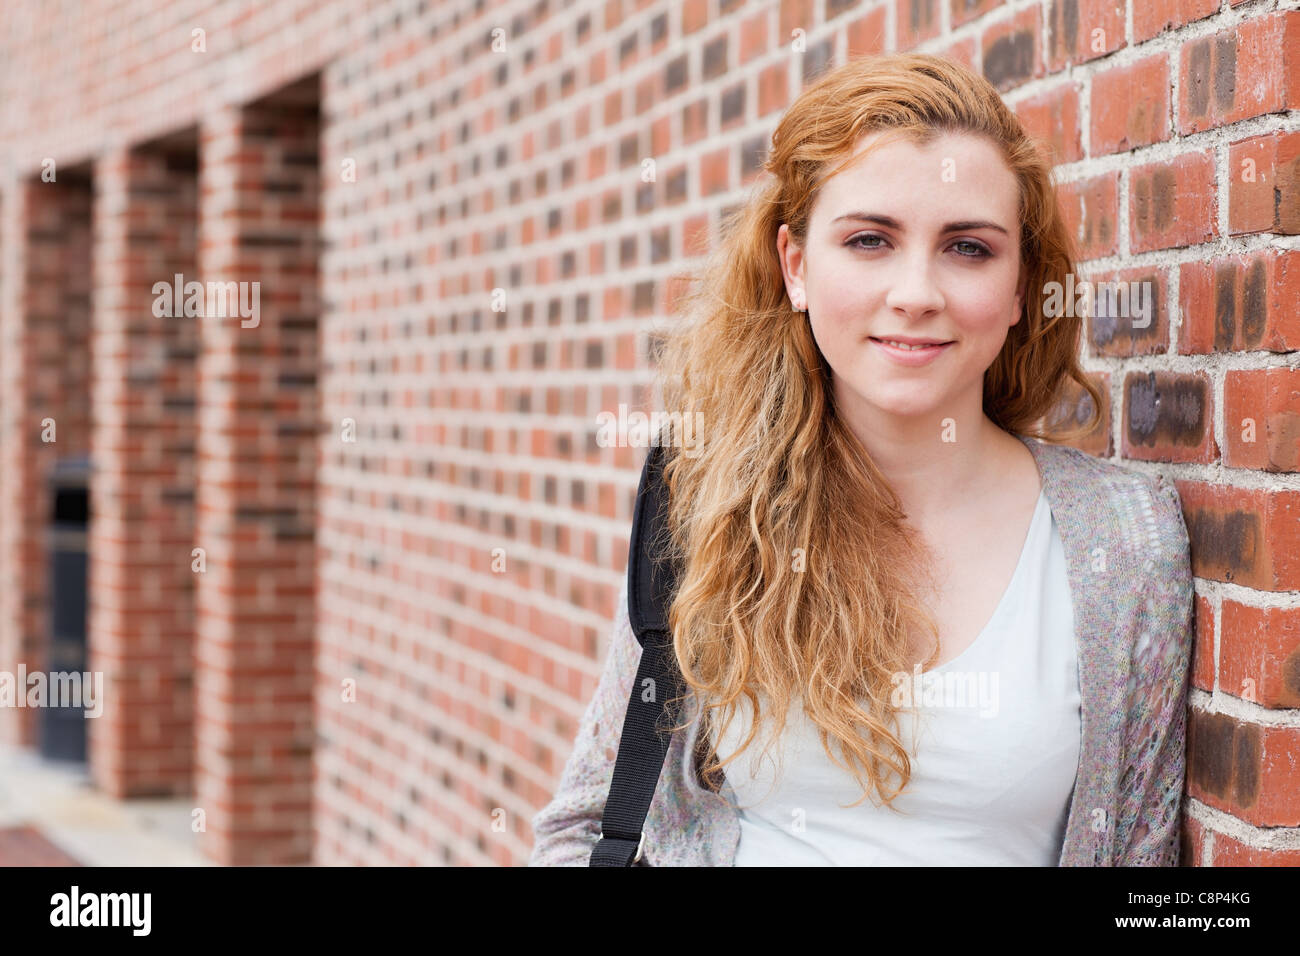 Lovely student standing up Stock Photo